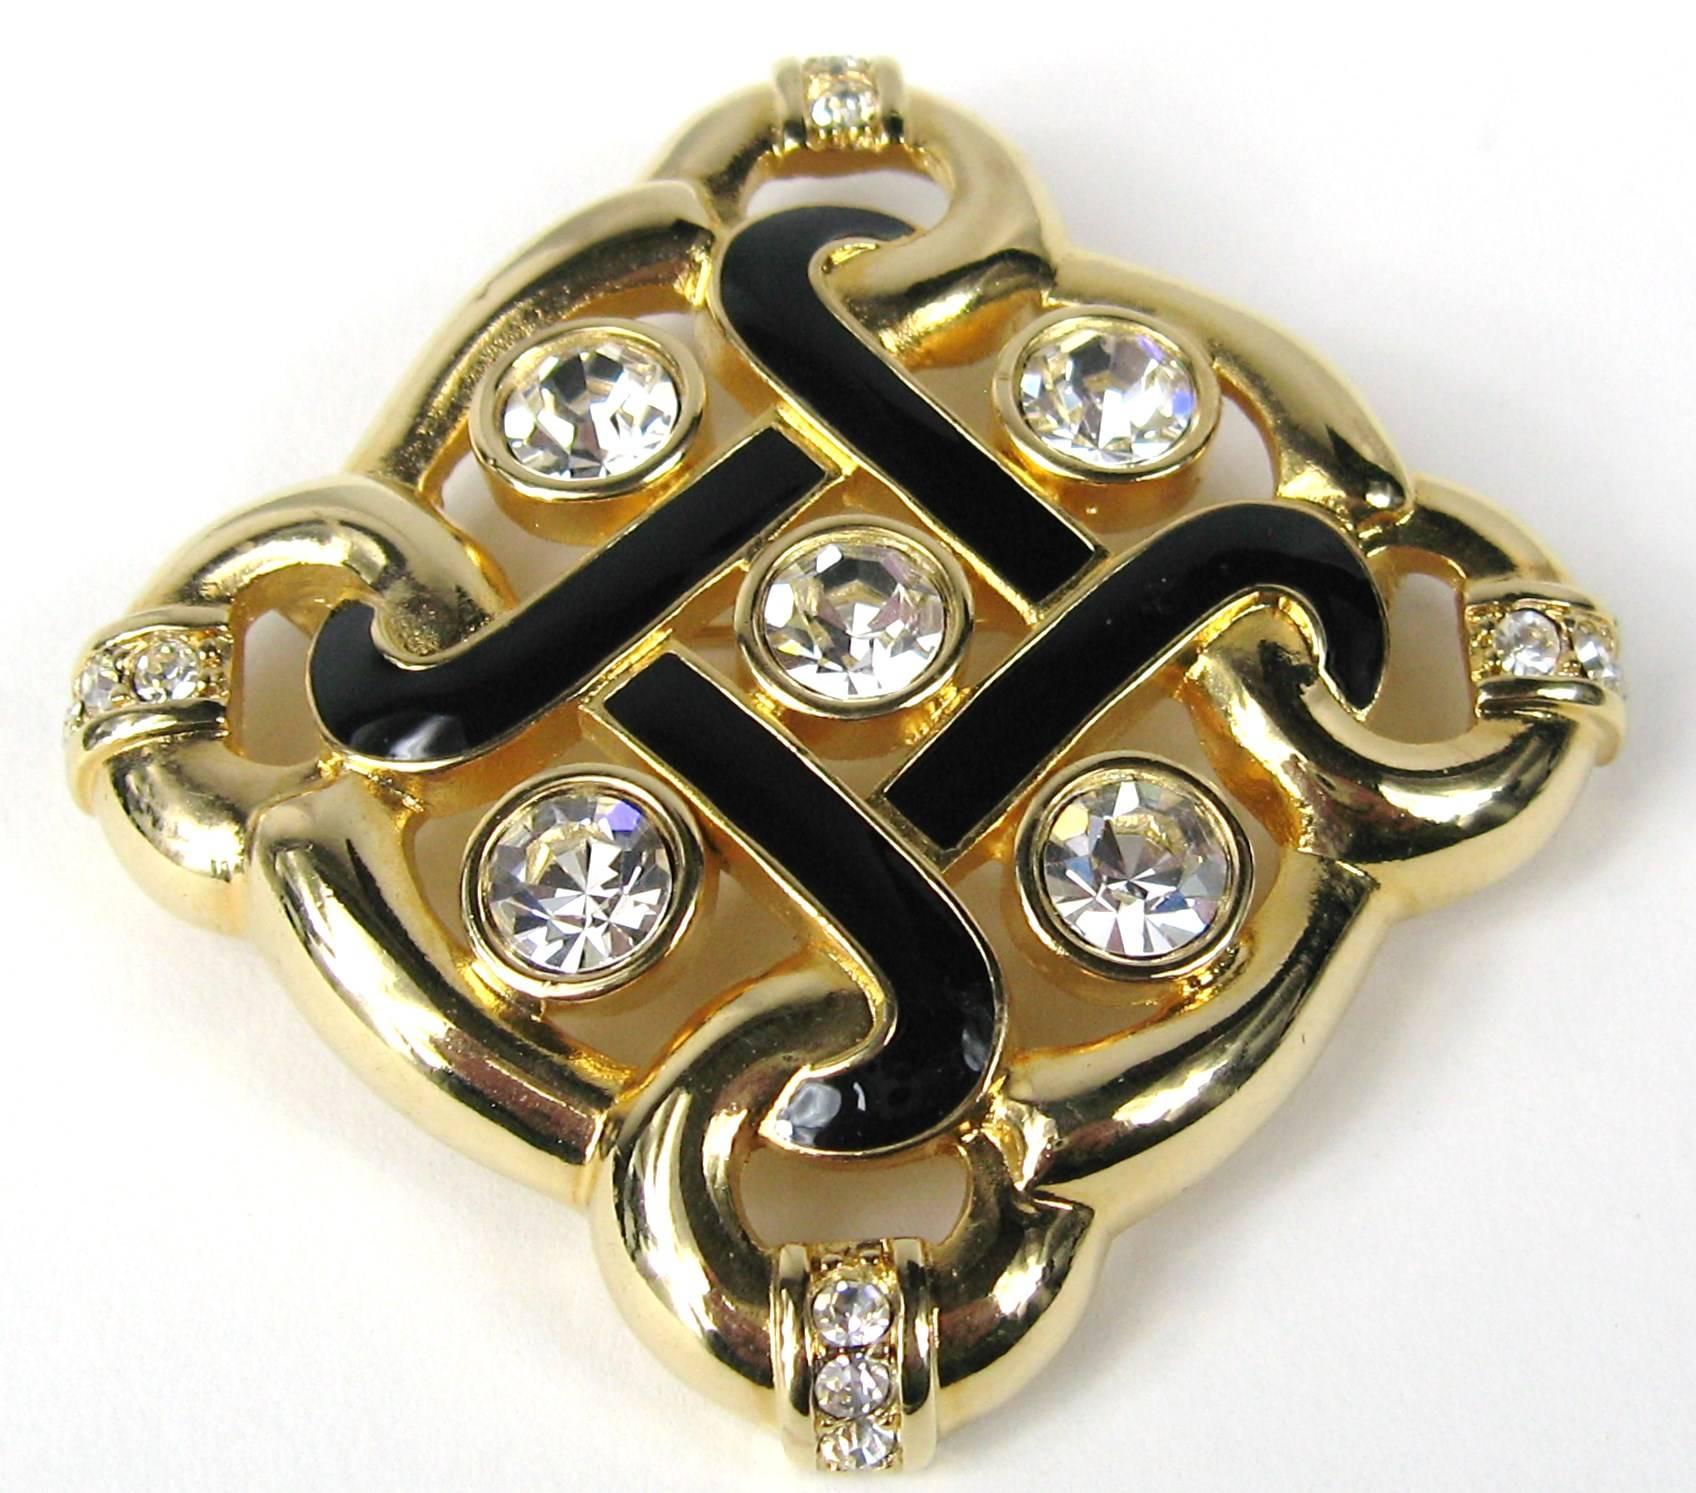 Gold gilt Swarovski Crystal Brooch Black enamel detailing. Measuring 1.73 in square. Visit our store front for hundreds of designer costume jewelry as well as sterling silver. Be sure to follow us to get email updates of our new additions every